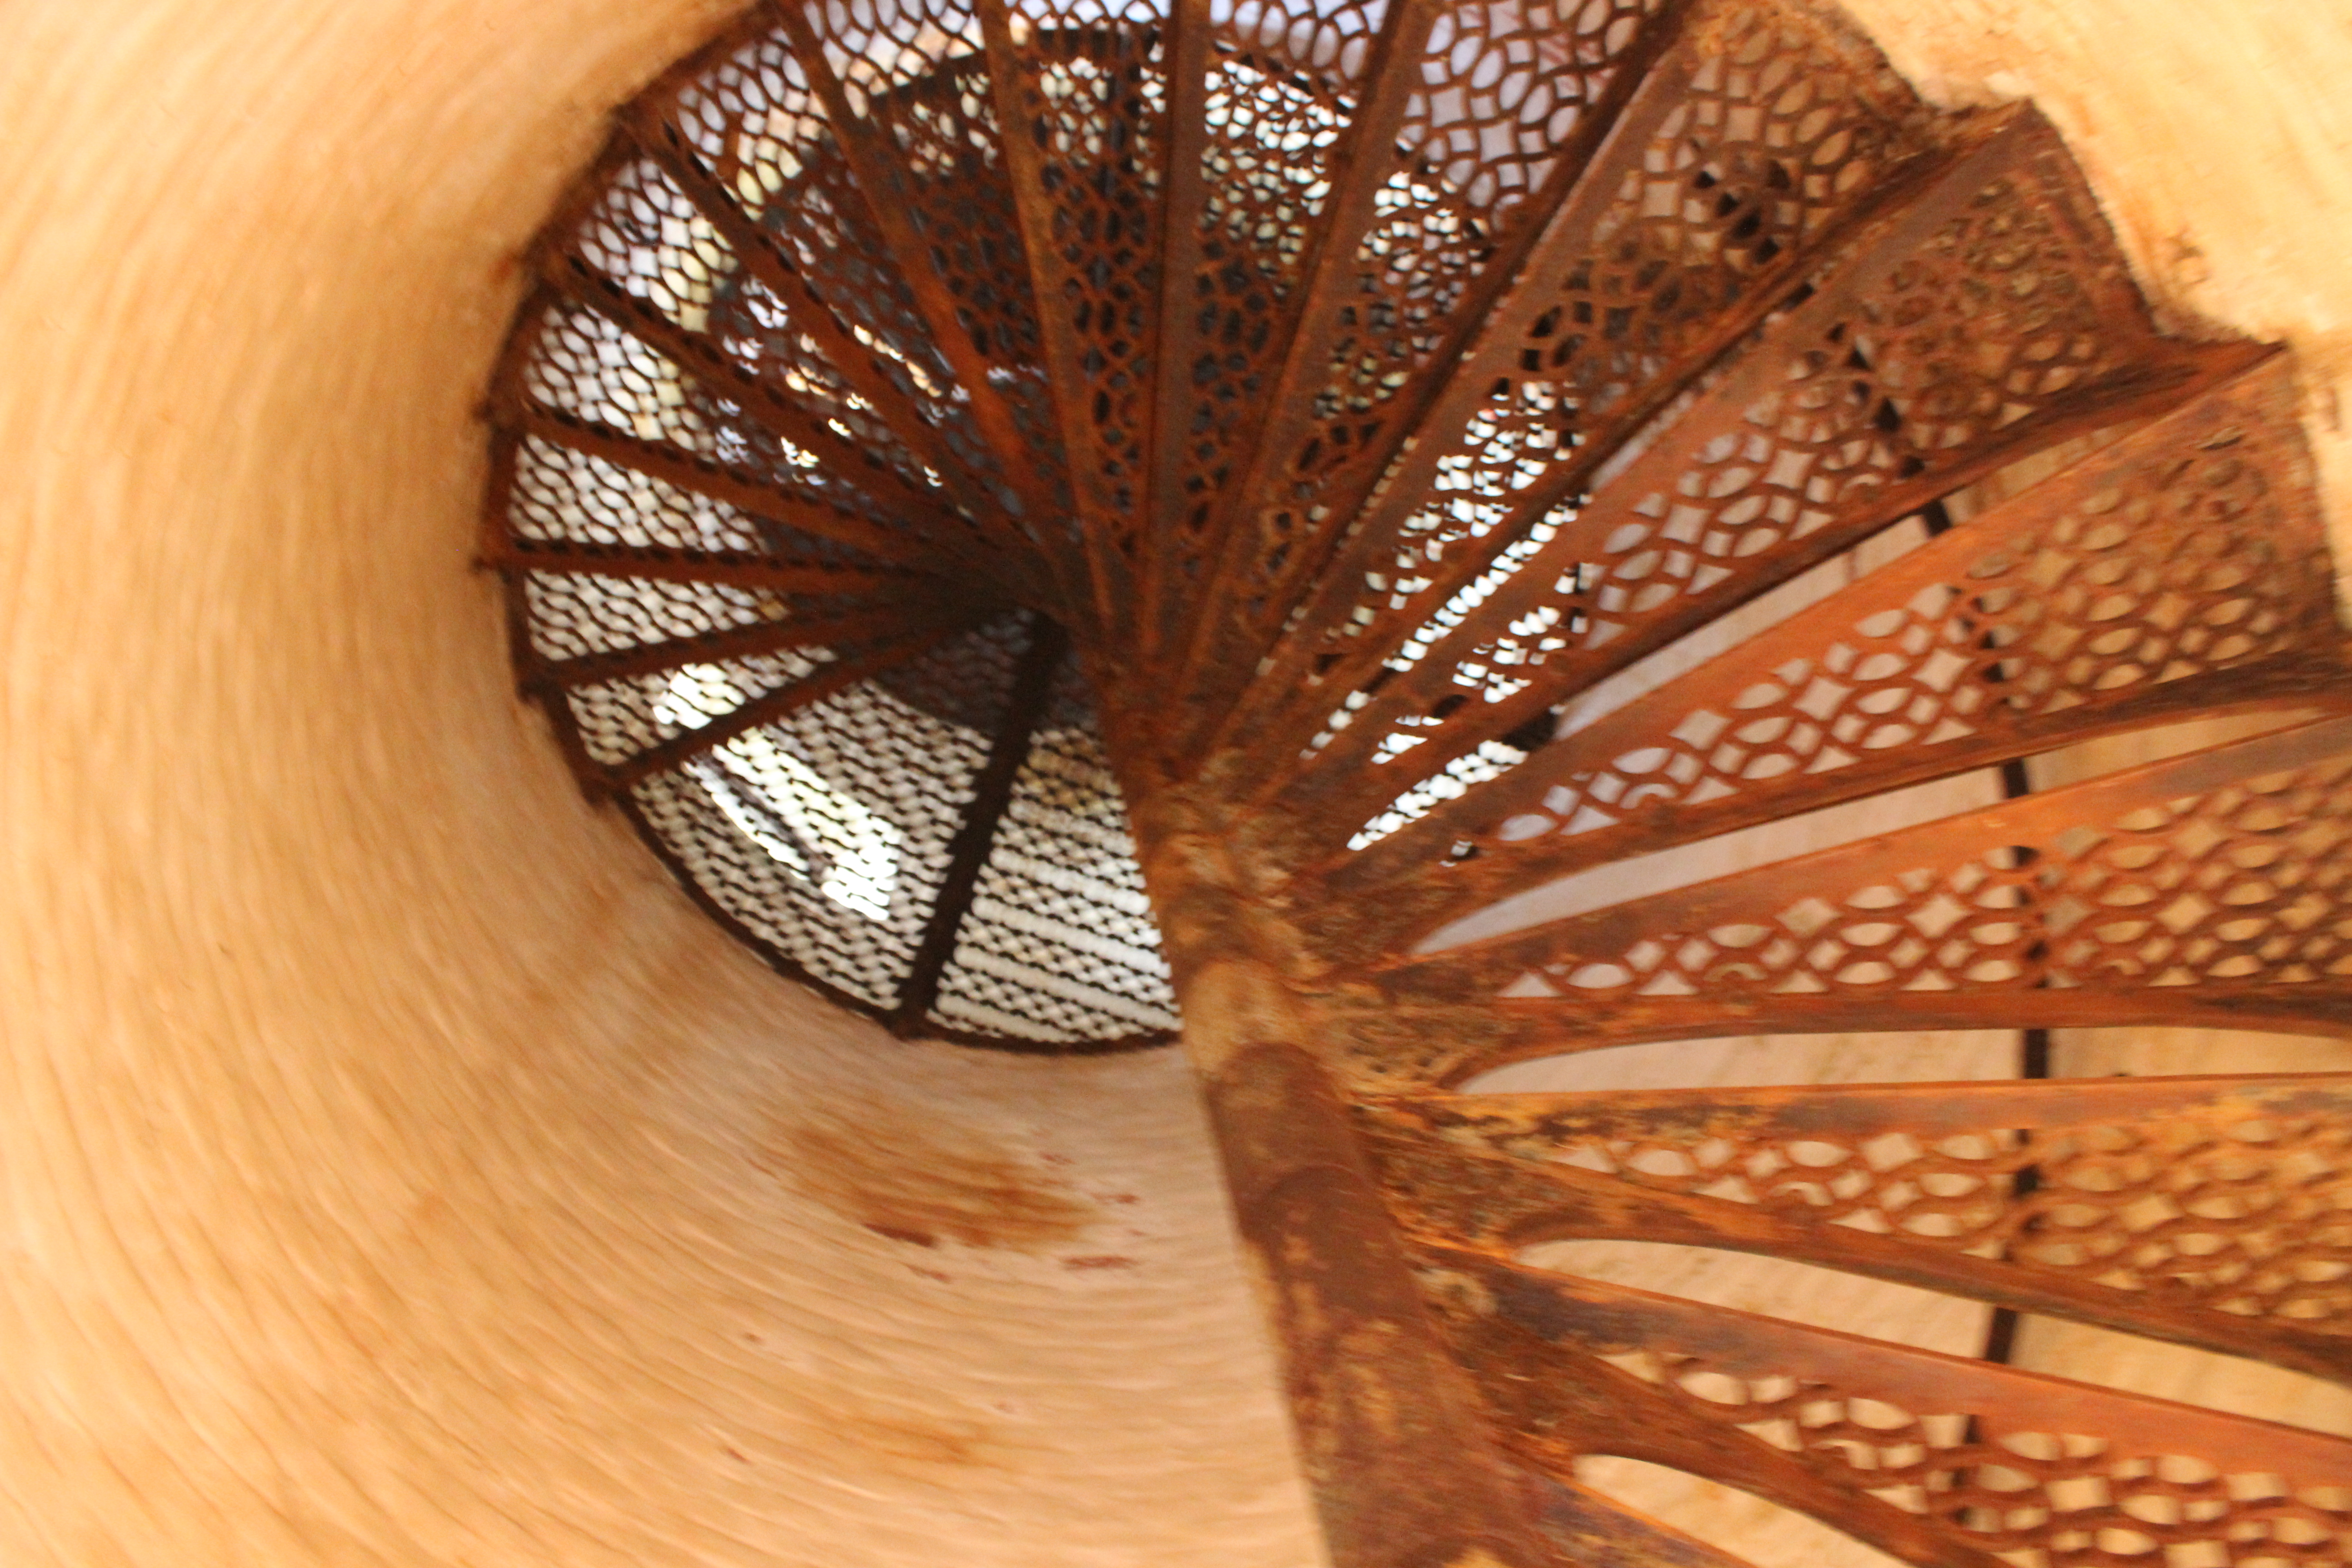 Charity Island Lighthouse Tower Spiral Stairacse